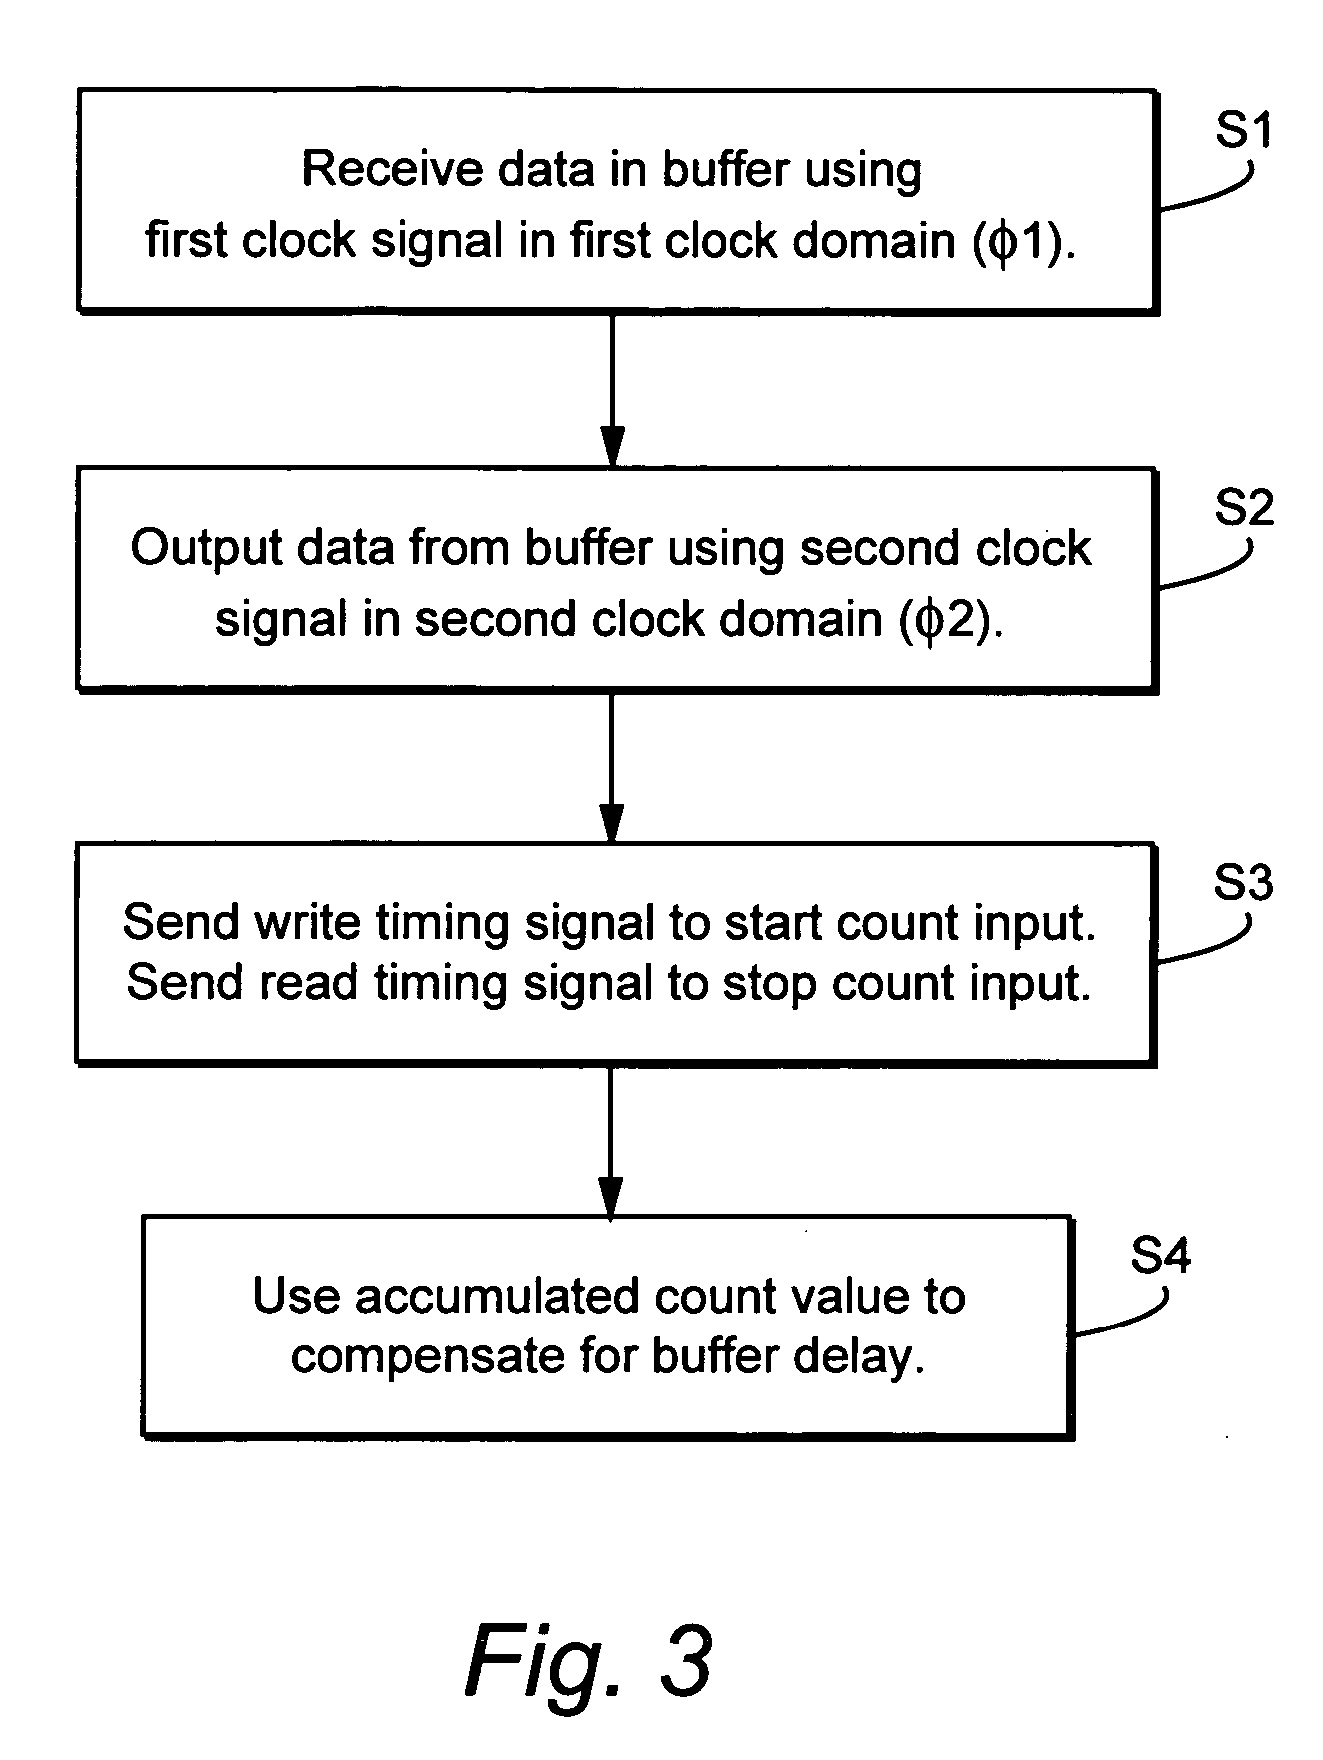 Determining a time difference between first and second clock domains